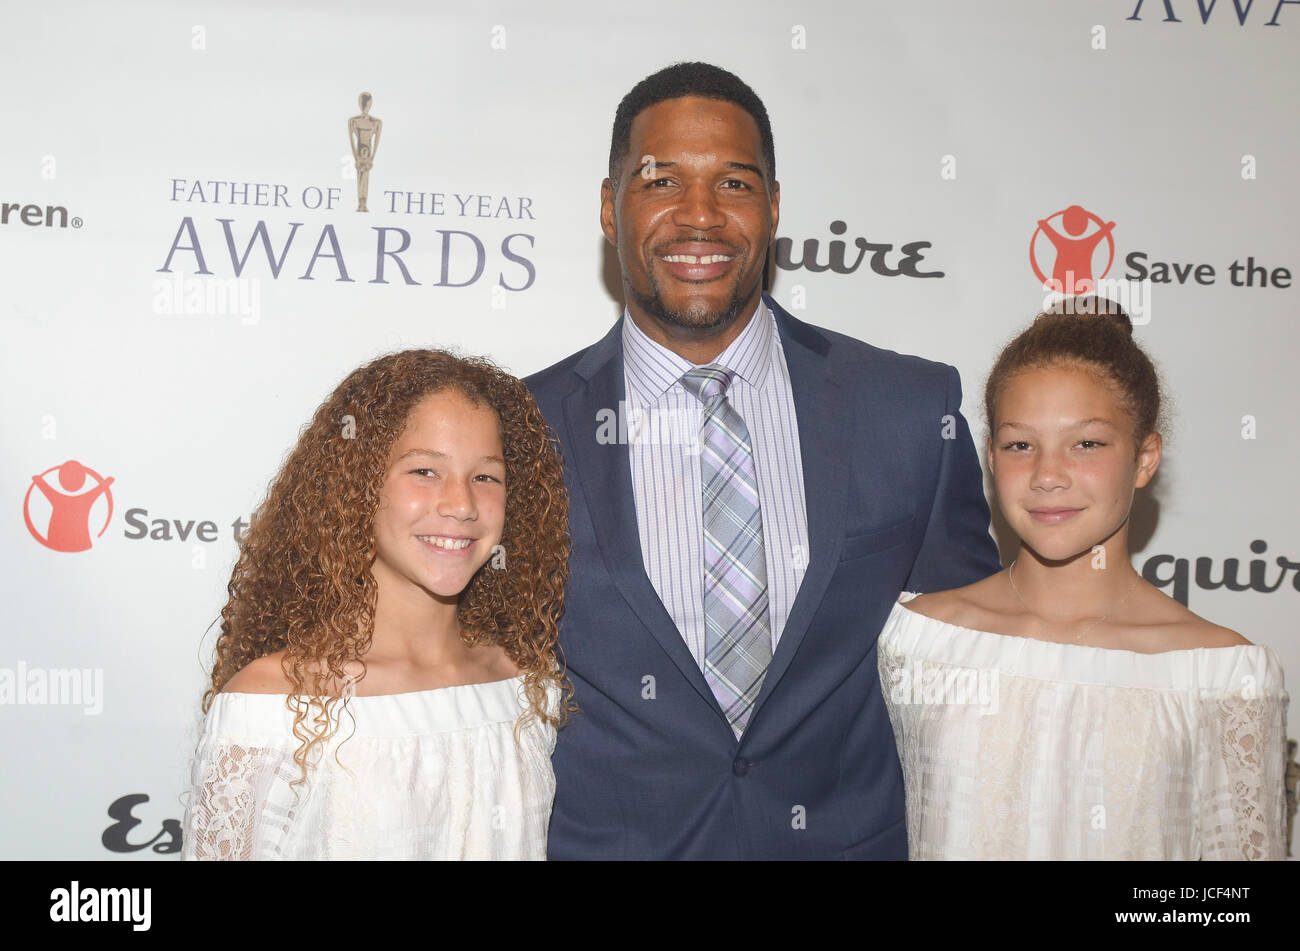 New York, NY, USA. 15th June, 2017. Michael Strahan and his twin daughter's Isabella and Sophia attend the the 76th Annual Father of the Year Awards luncheon, on Thursday, June 15, 2017 at the New York Hilton Hotel. Credit: Raymond Hagans/Media Punch/Alamy Live News Stock Photo